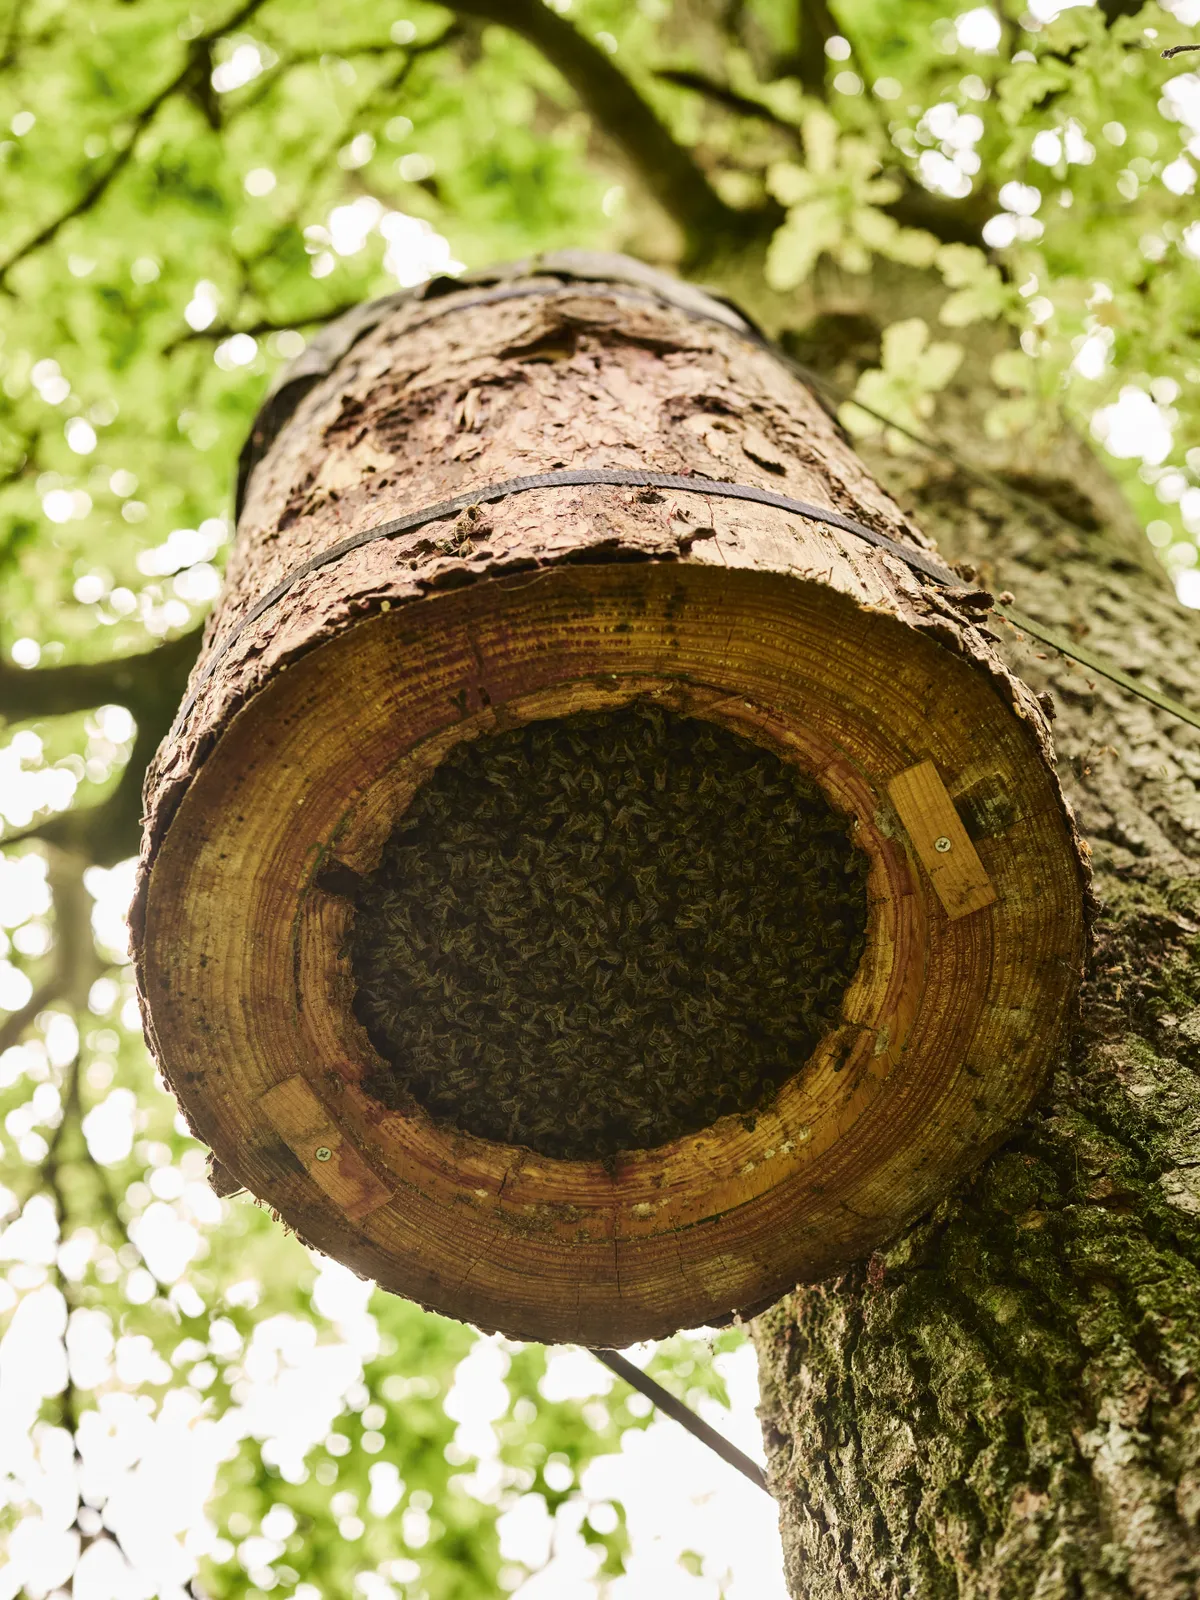 An established colony of honeybees sits on a comb